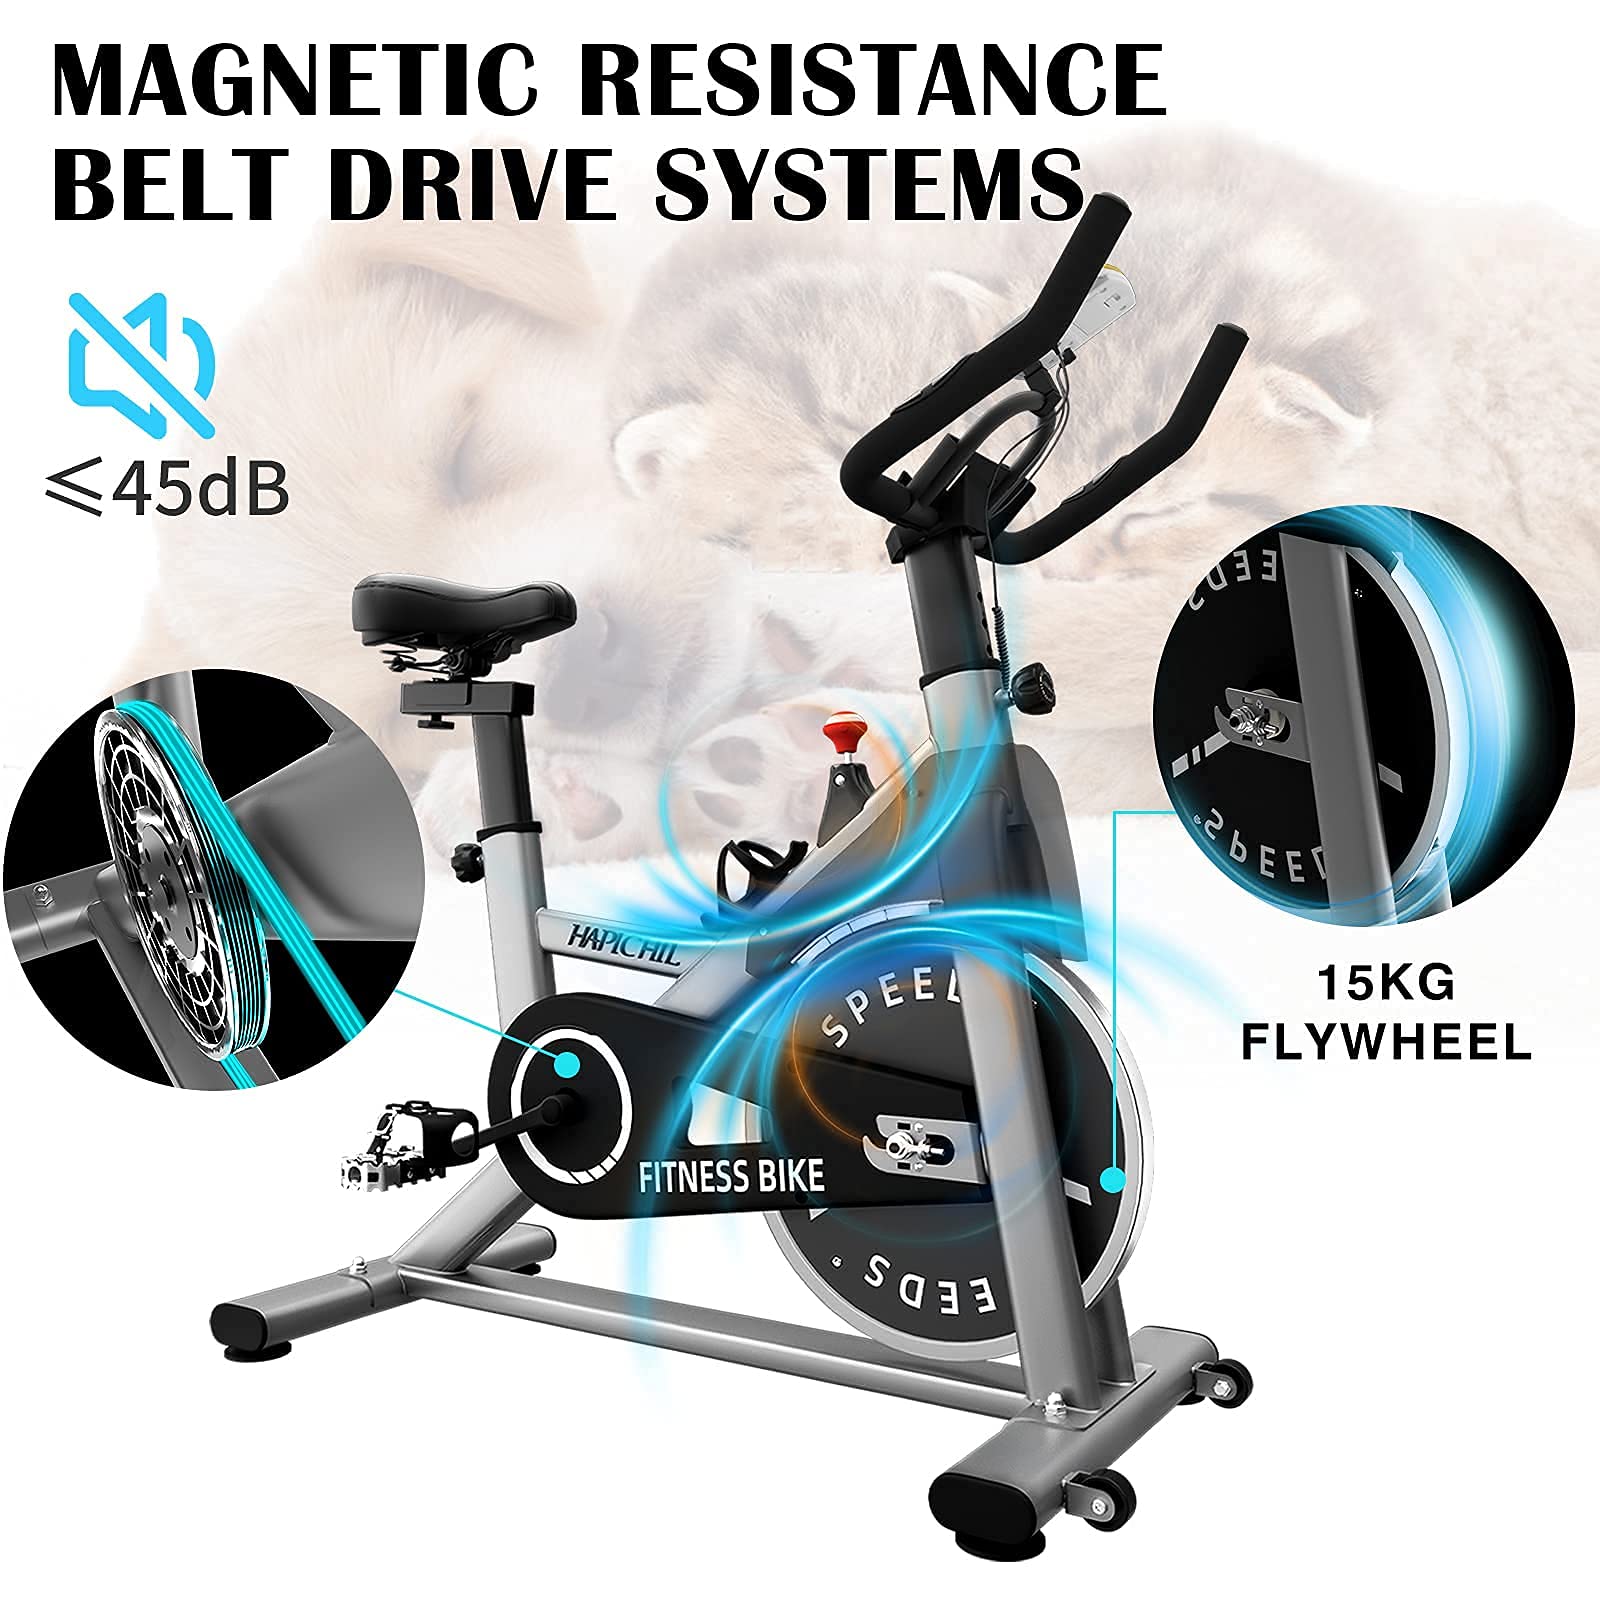 Hapichil SB001-B Spinning Bike Cycling Exercise Fitness Bike Magnetic Resistance & Heavy Flywheel Smooth Quiet Adjustable Height for Indoor Workout - Silver